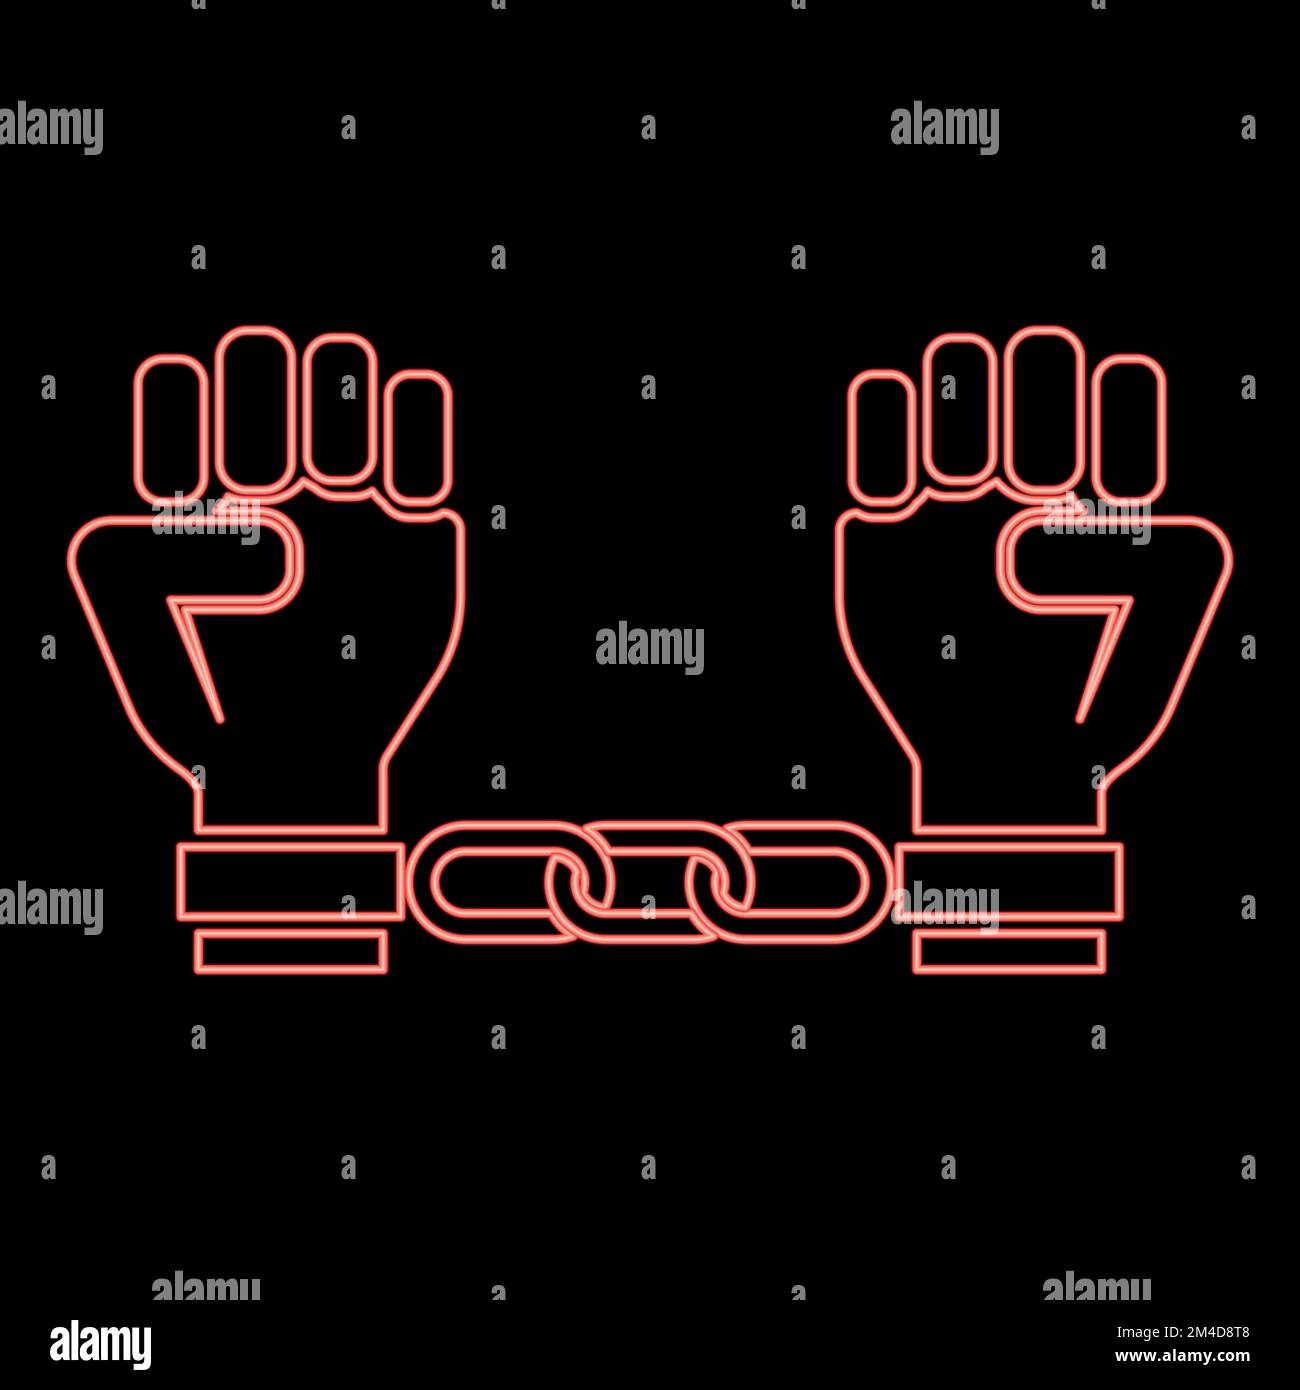 Neon handcuffed hands Chained human arms Prisoner concept Manacles on man Detention idea Fetters confine Shackles on person icon black color vector Stock Vector